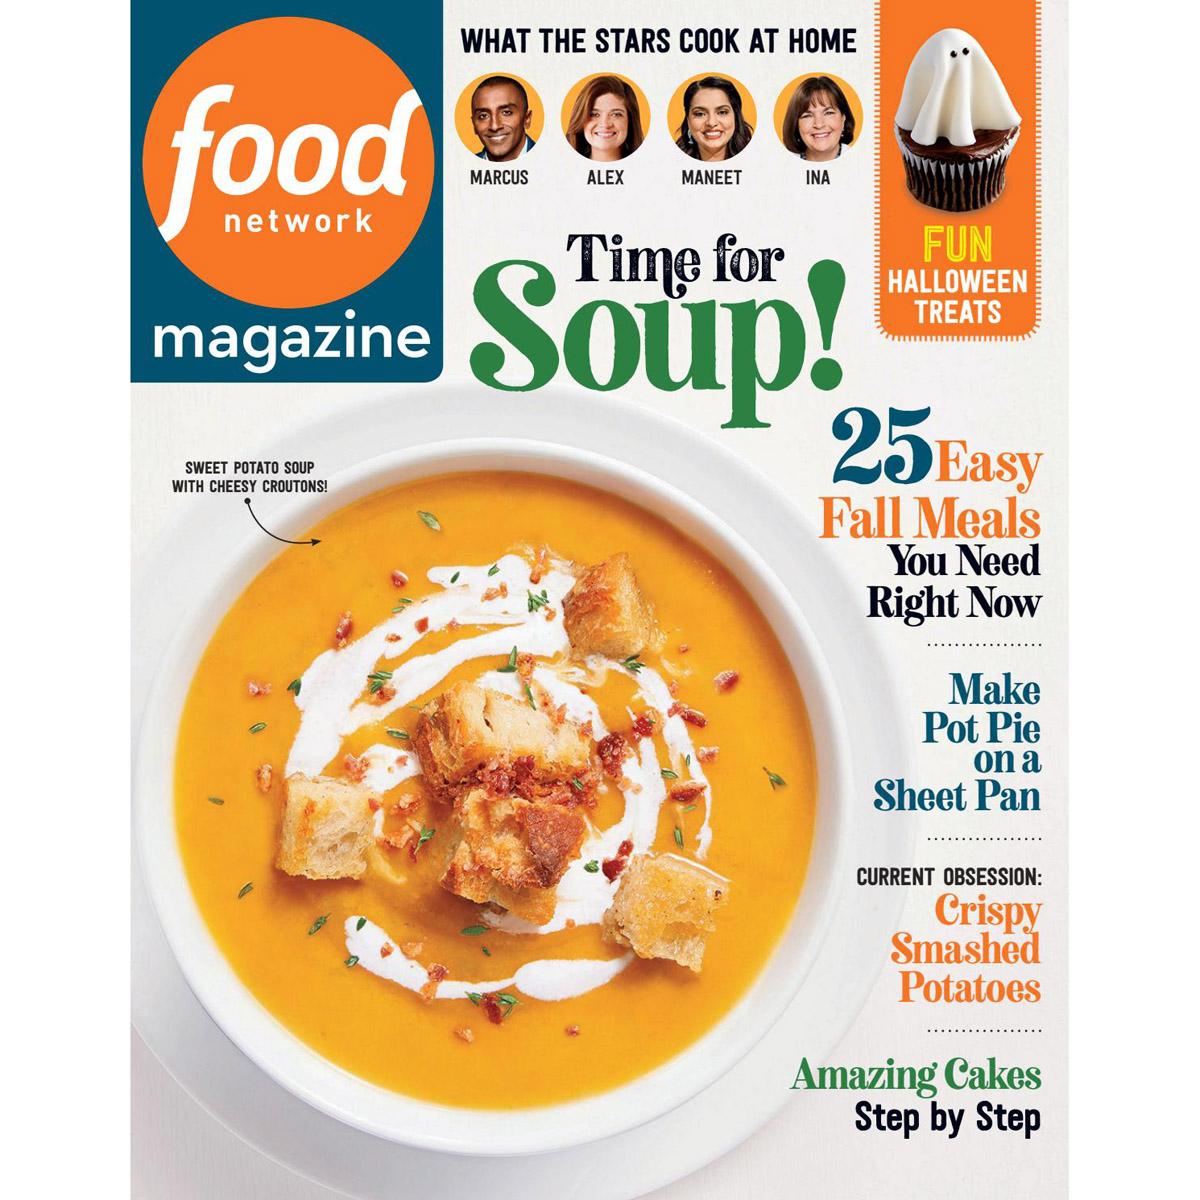 Chance to Win $500 From Food Network Magazine Sweepstakes